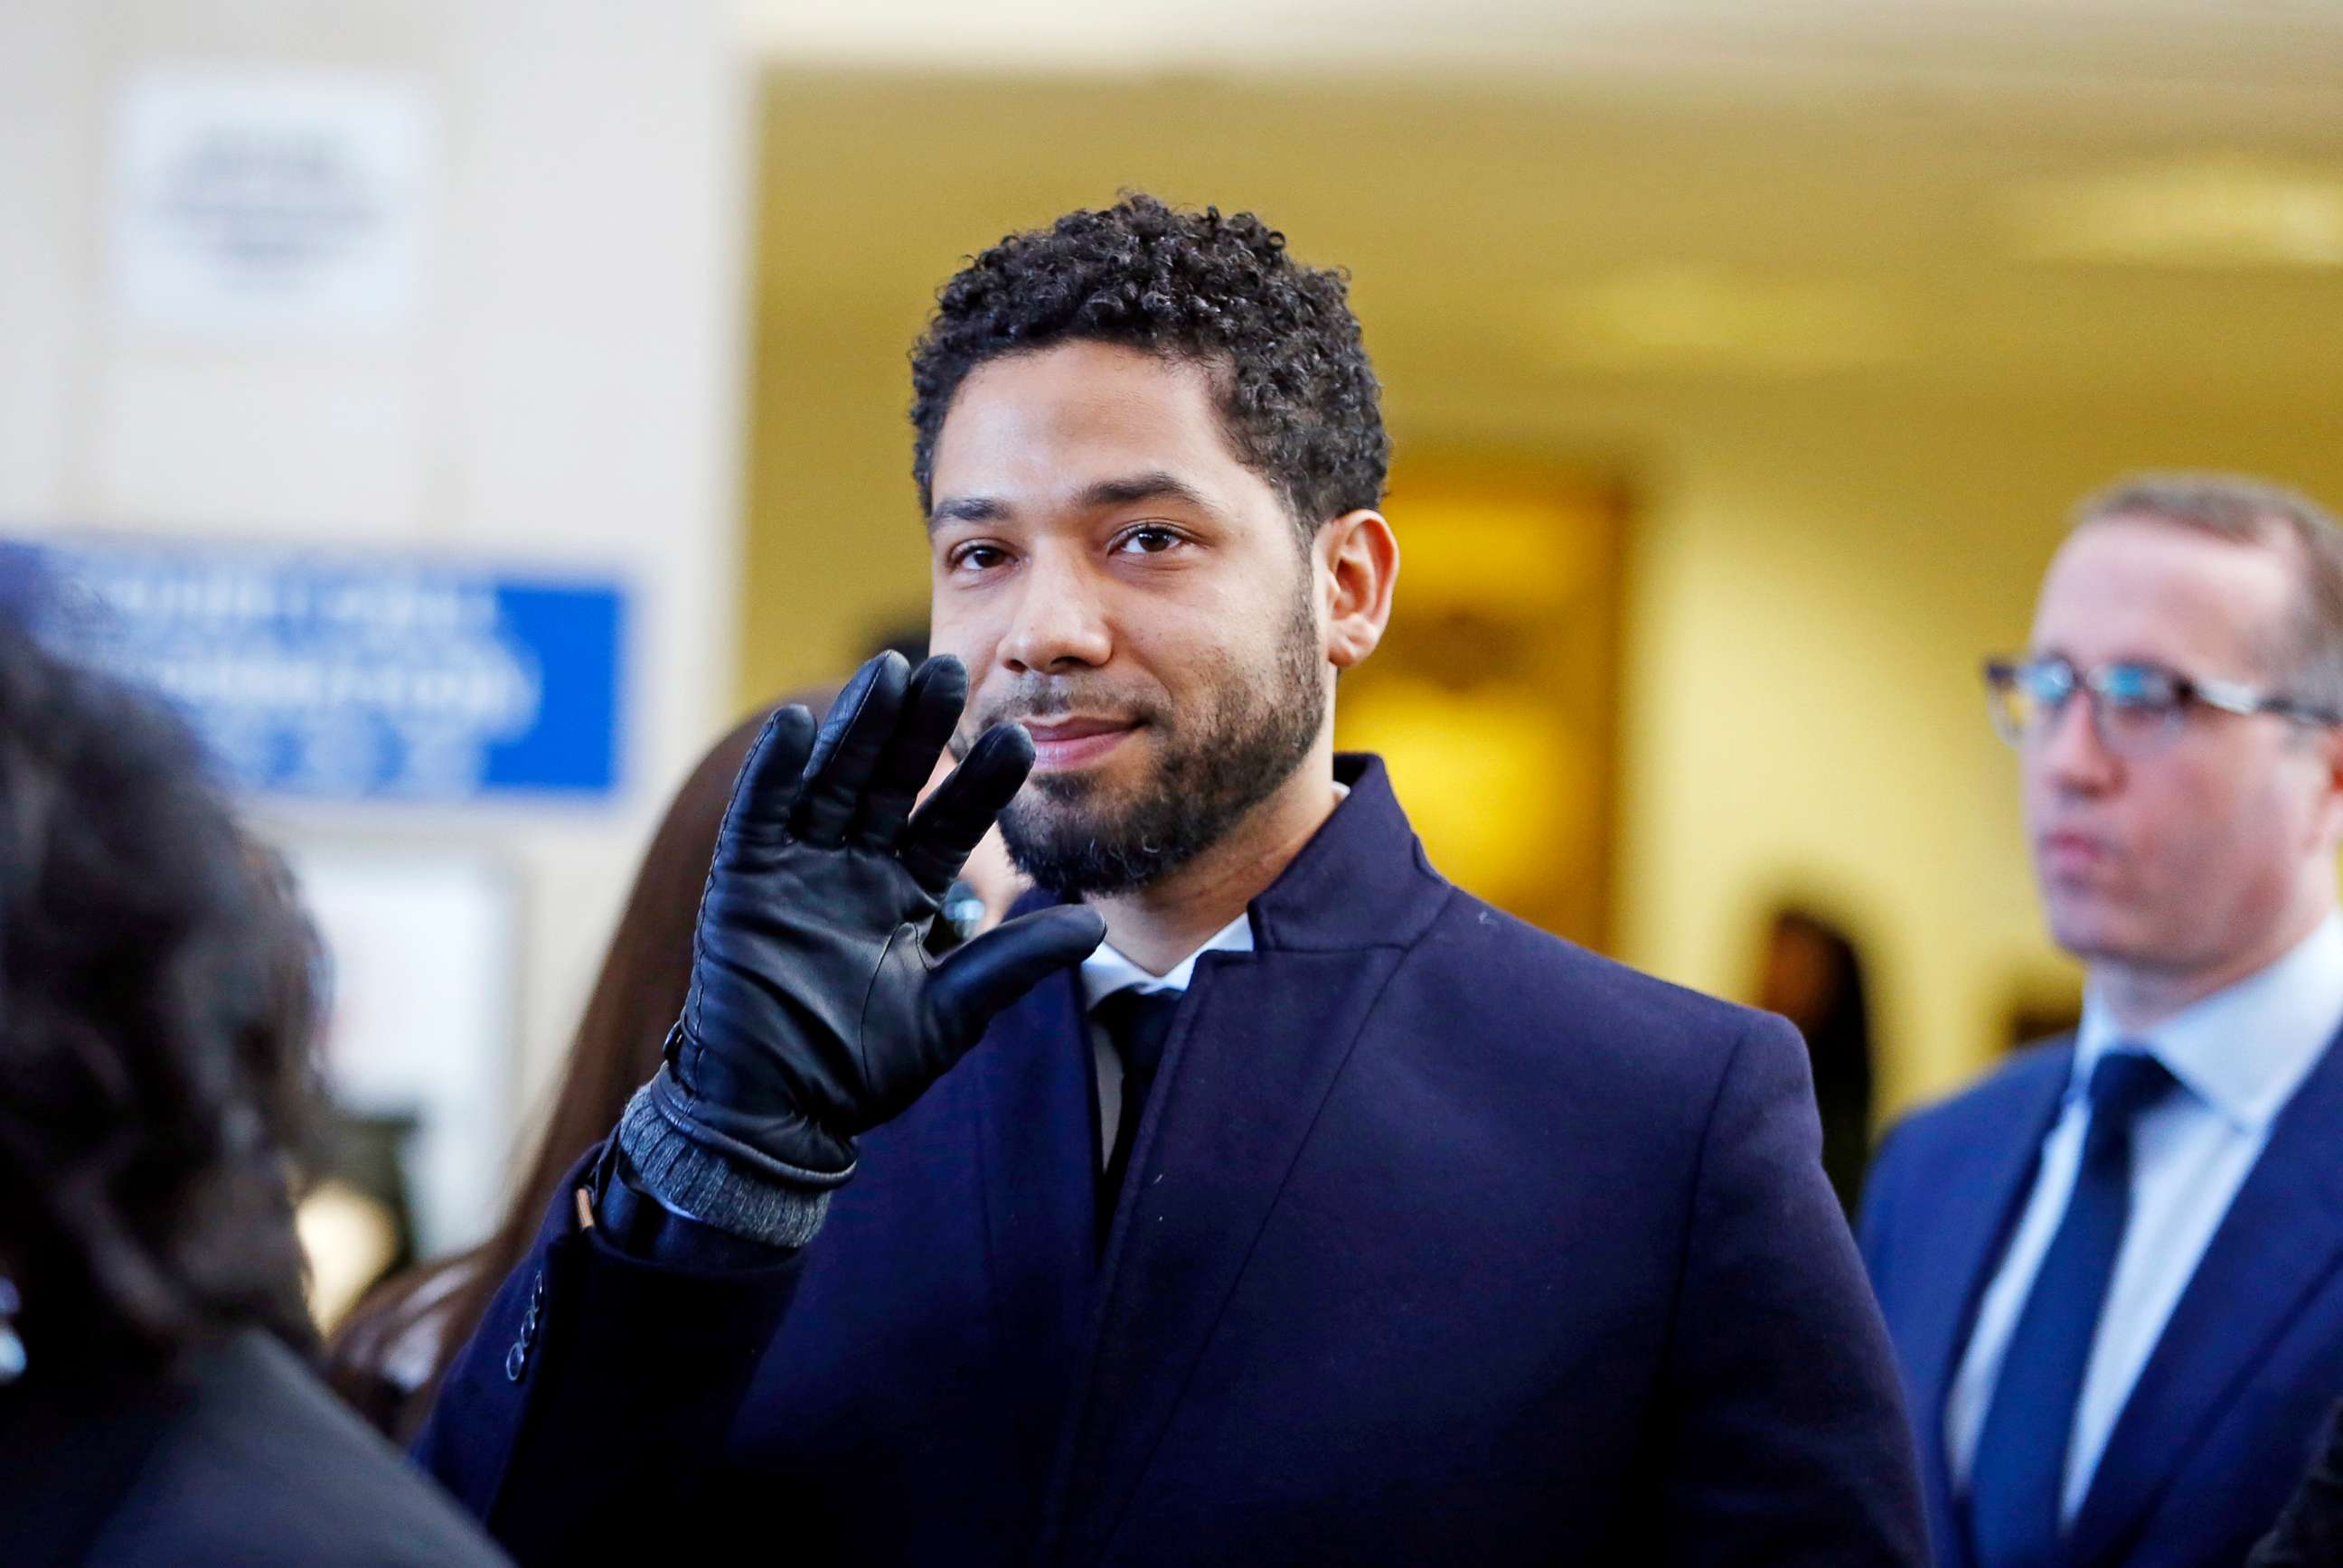 PHOTO: Jussie Smollett waves as he follows his attorney after his court appearance at Leighton Courthouse on March 26, 2019 in Chicago.